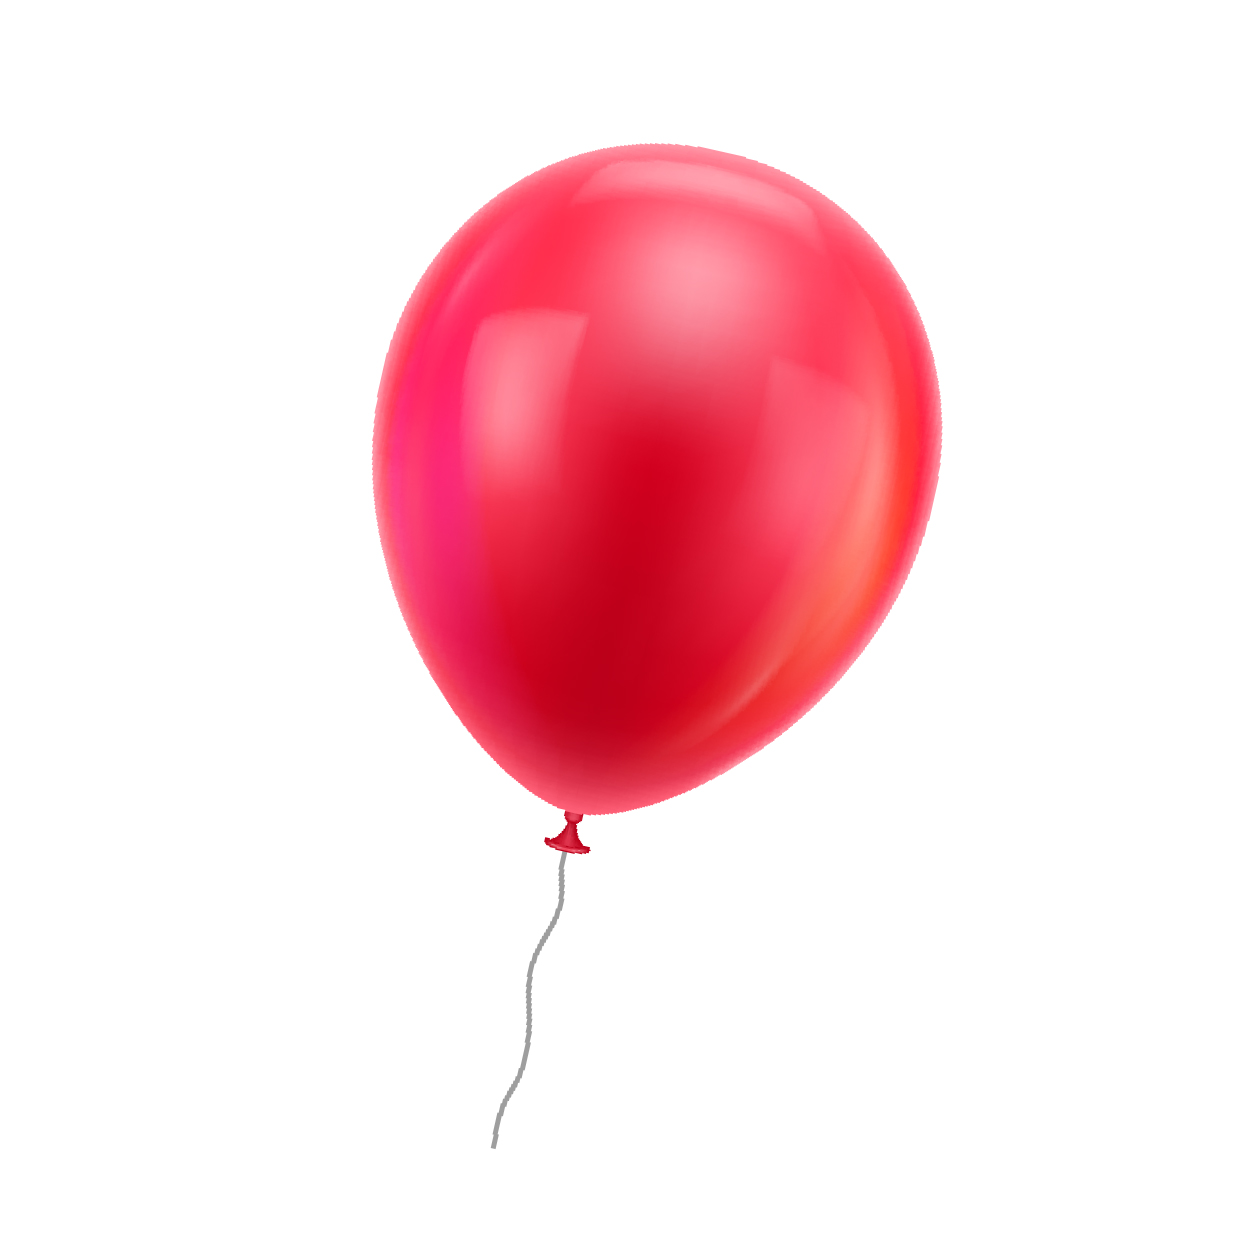 RED BALLOON - sent on October 11th, 2020